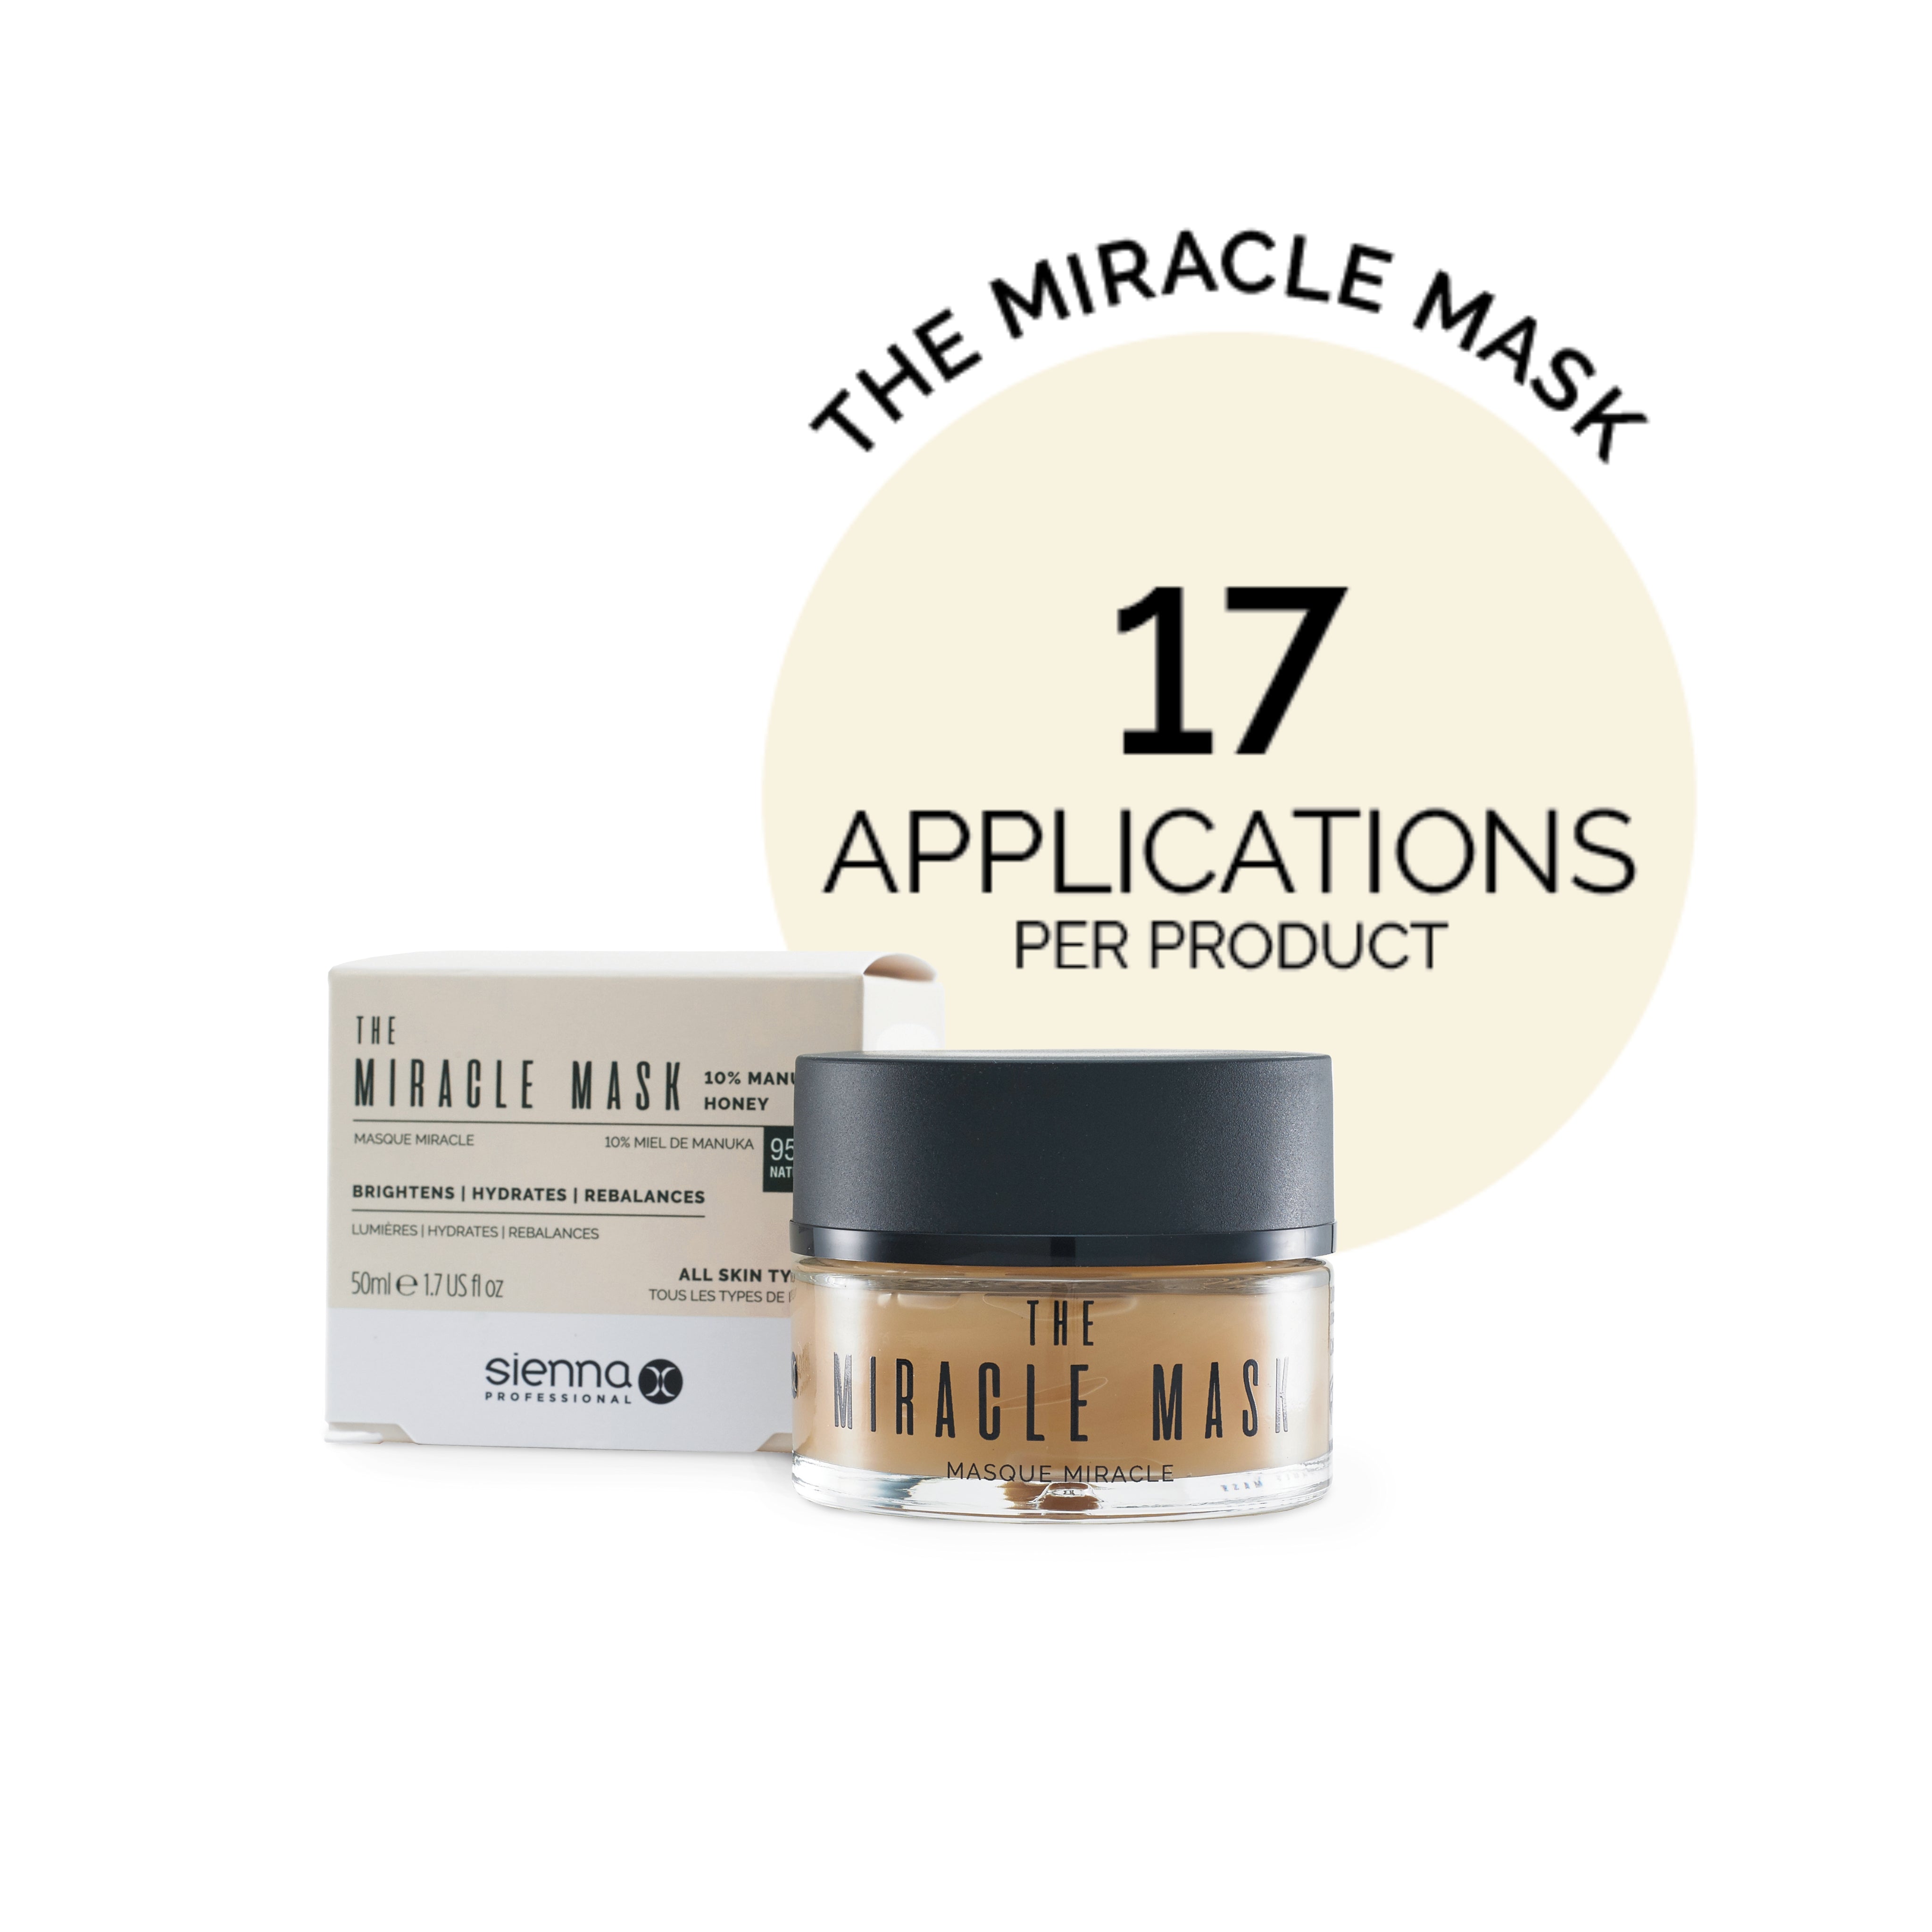 The Miracle Mask